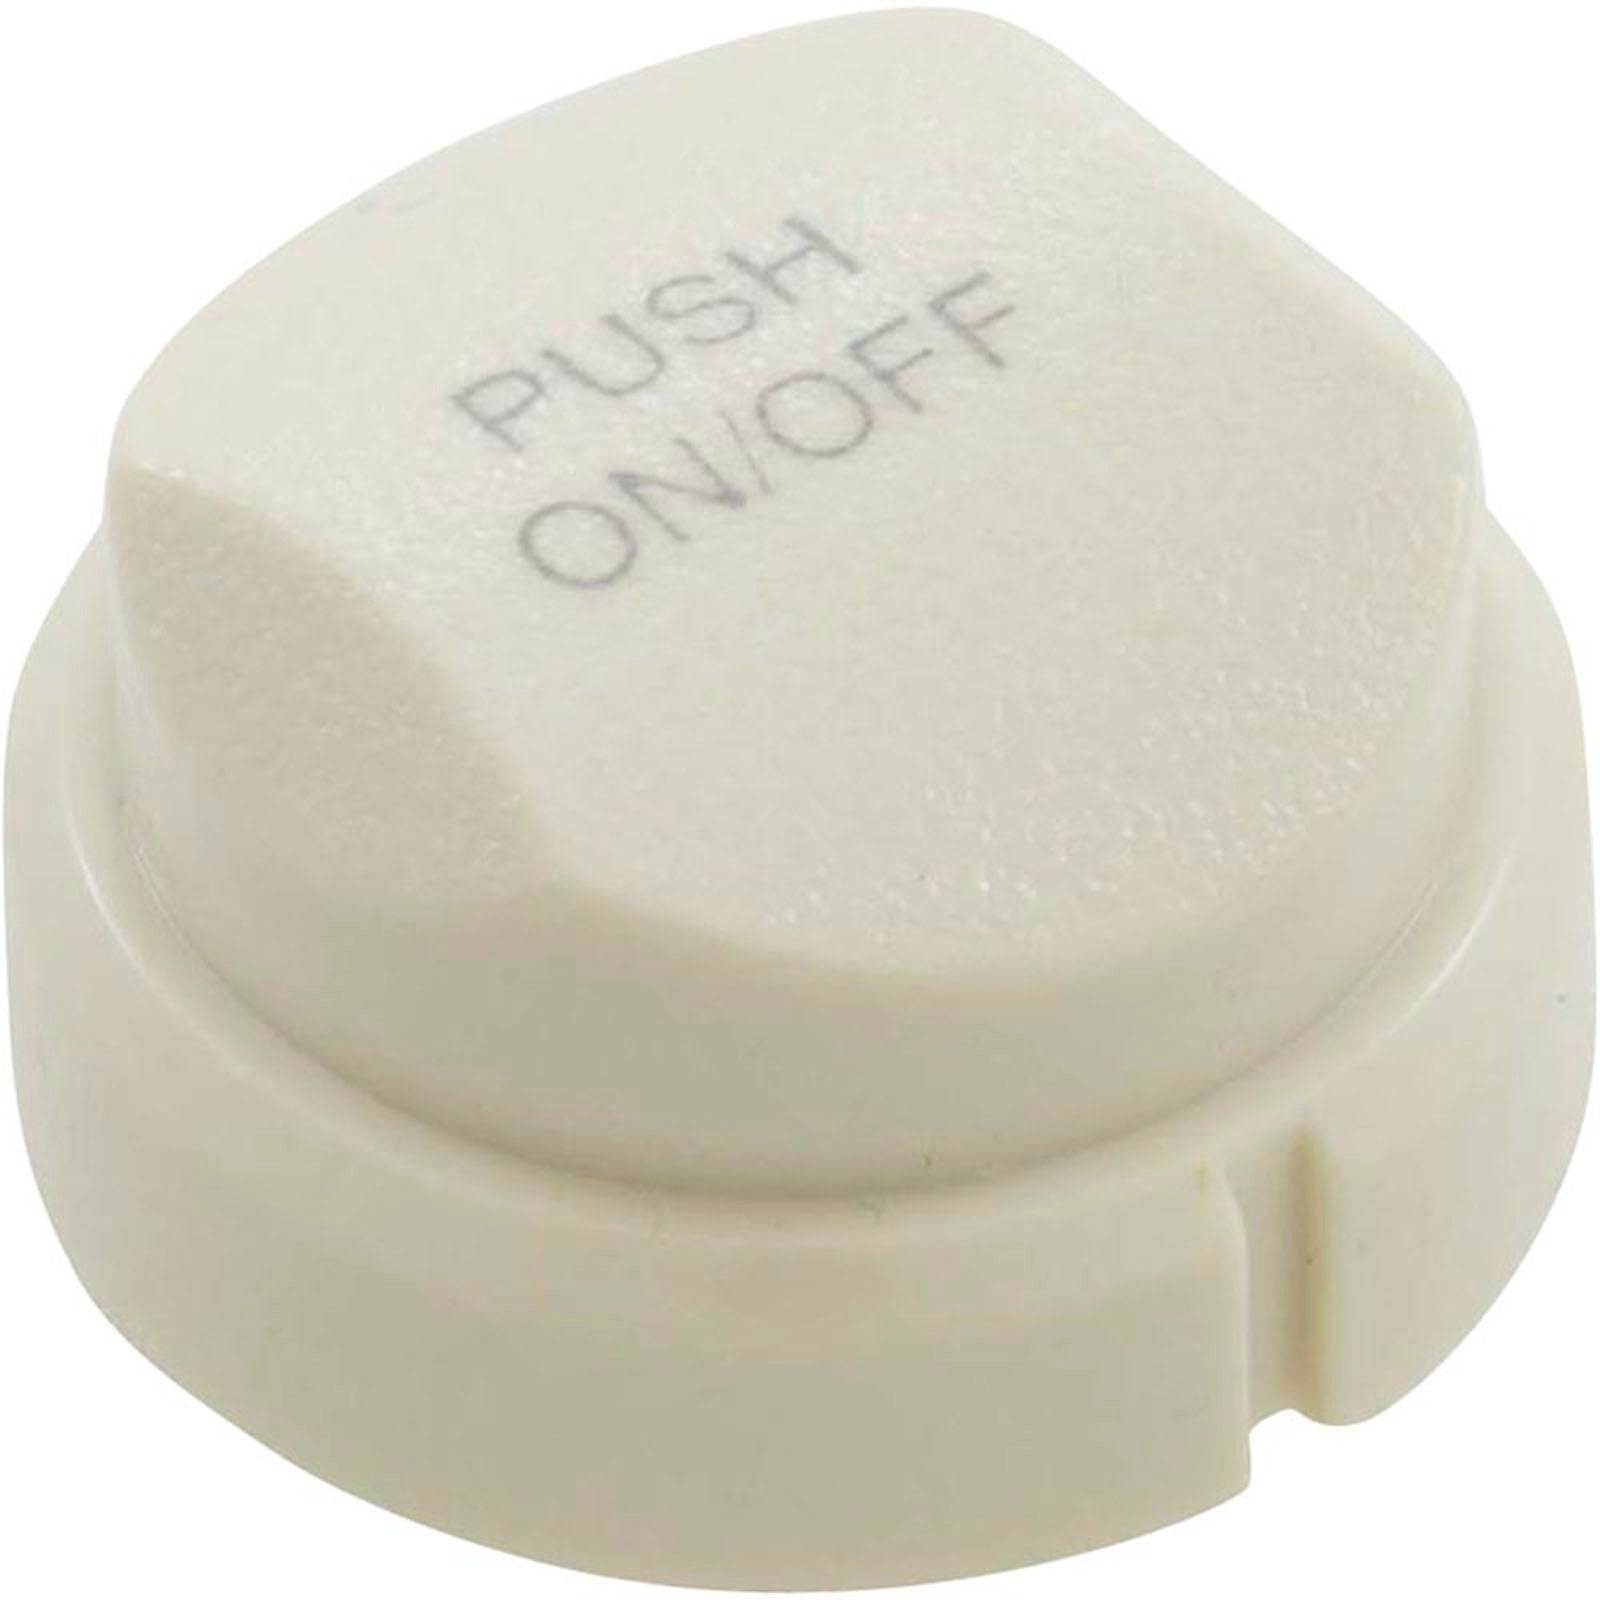 Air Button Panel 1 Position (G109xxx)| Control Panel | #2 On/off Button, Almond